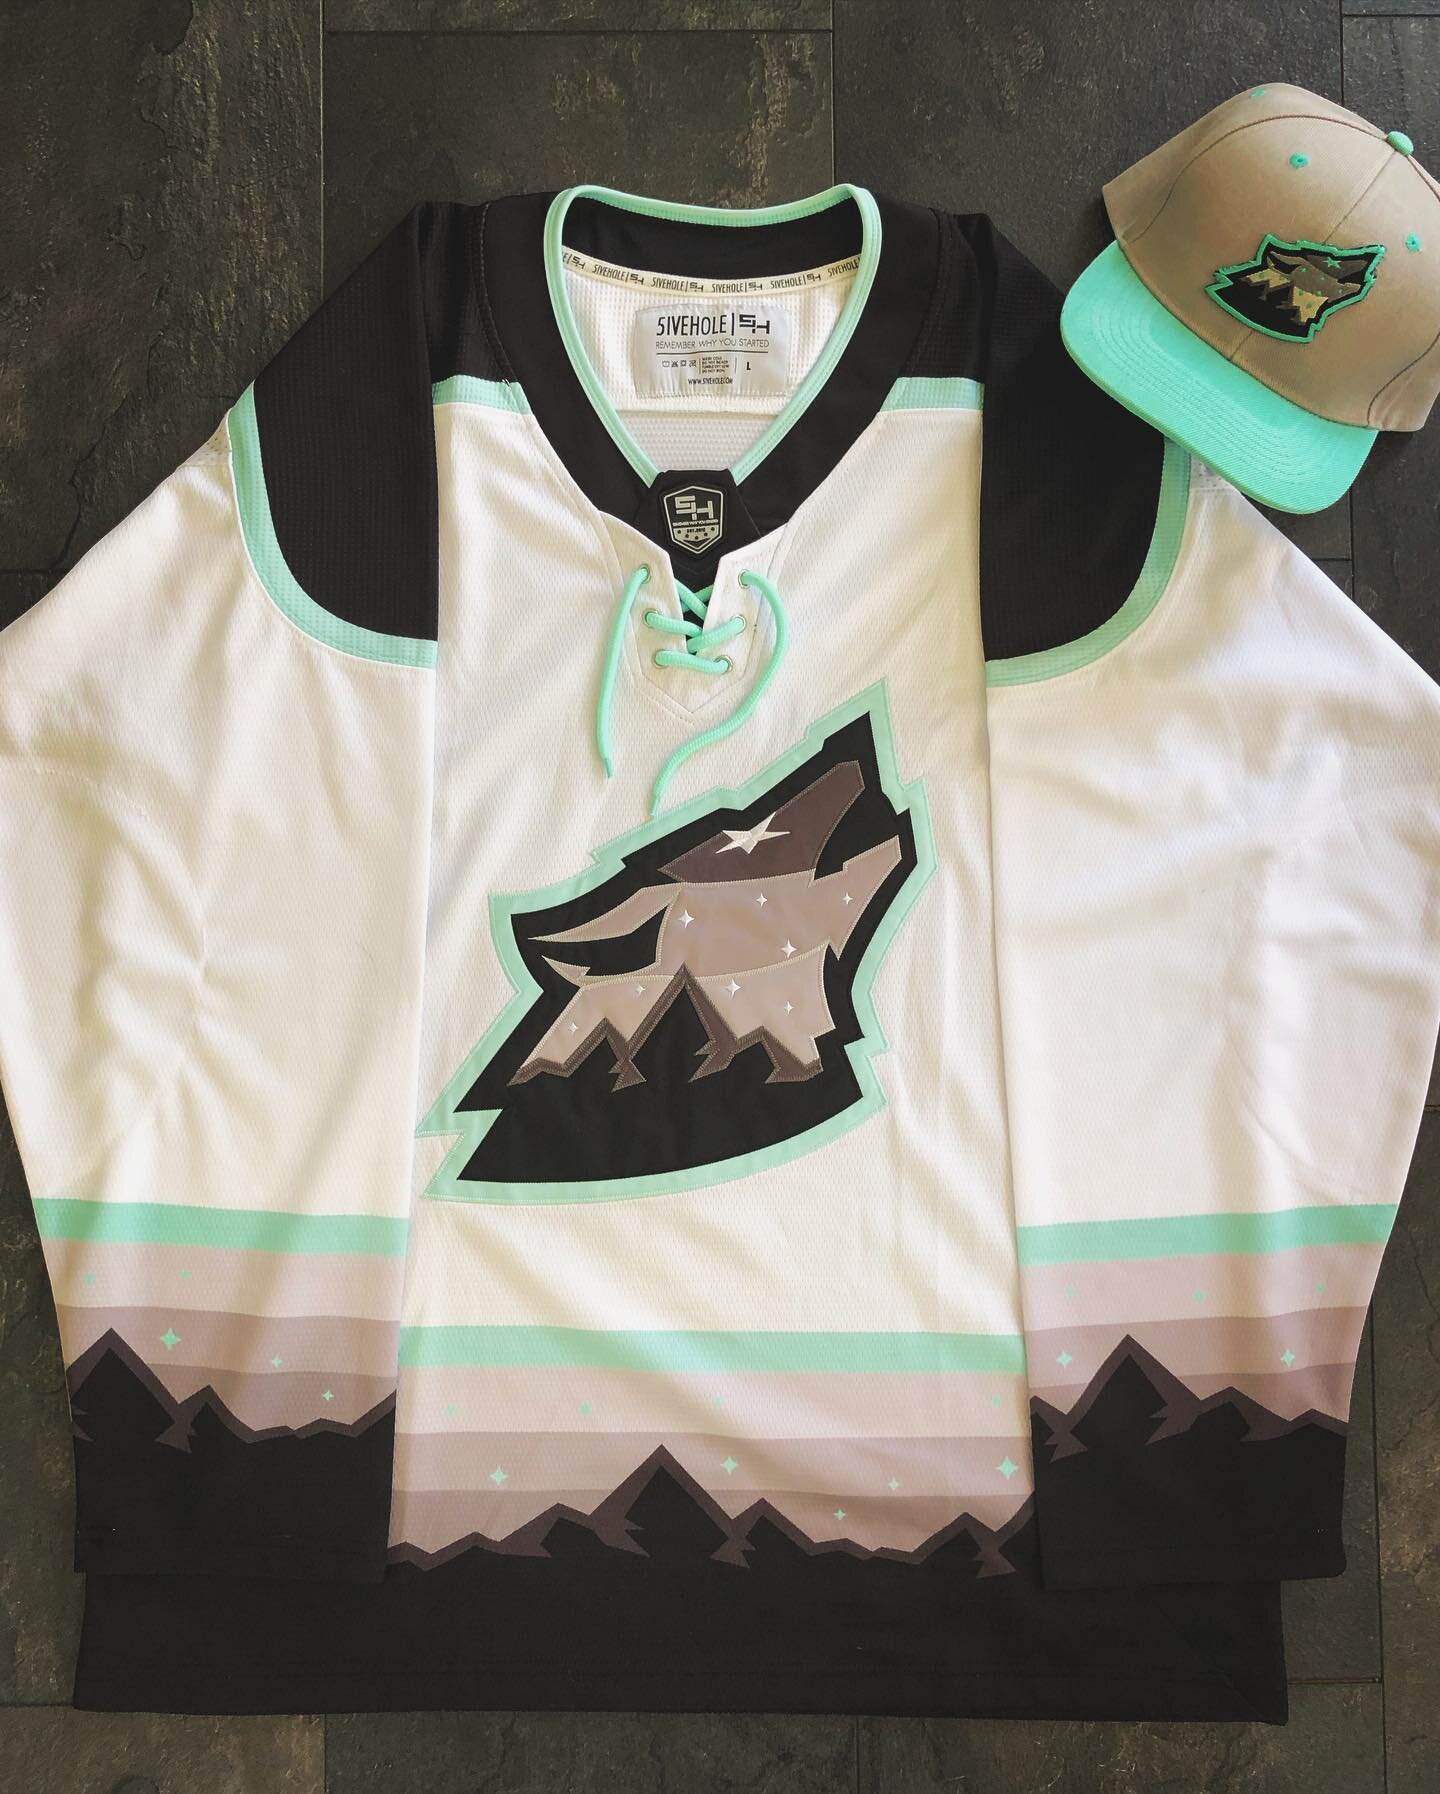 Northern Lights away jersey is available now! First 10 orders get the matching SnapBack for free! 🐺